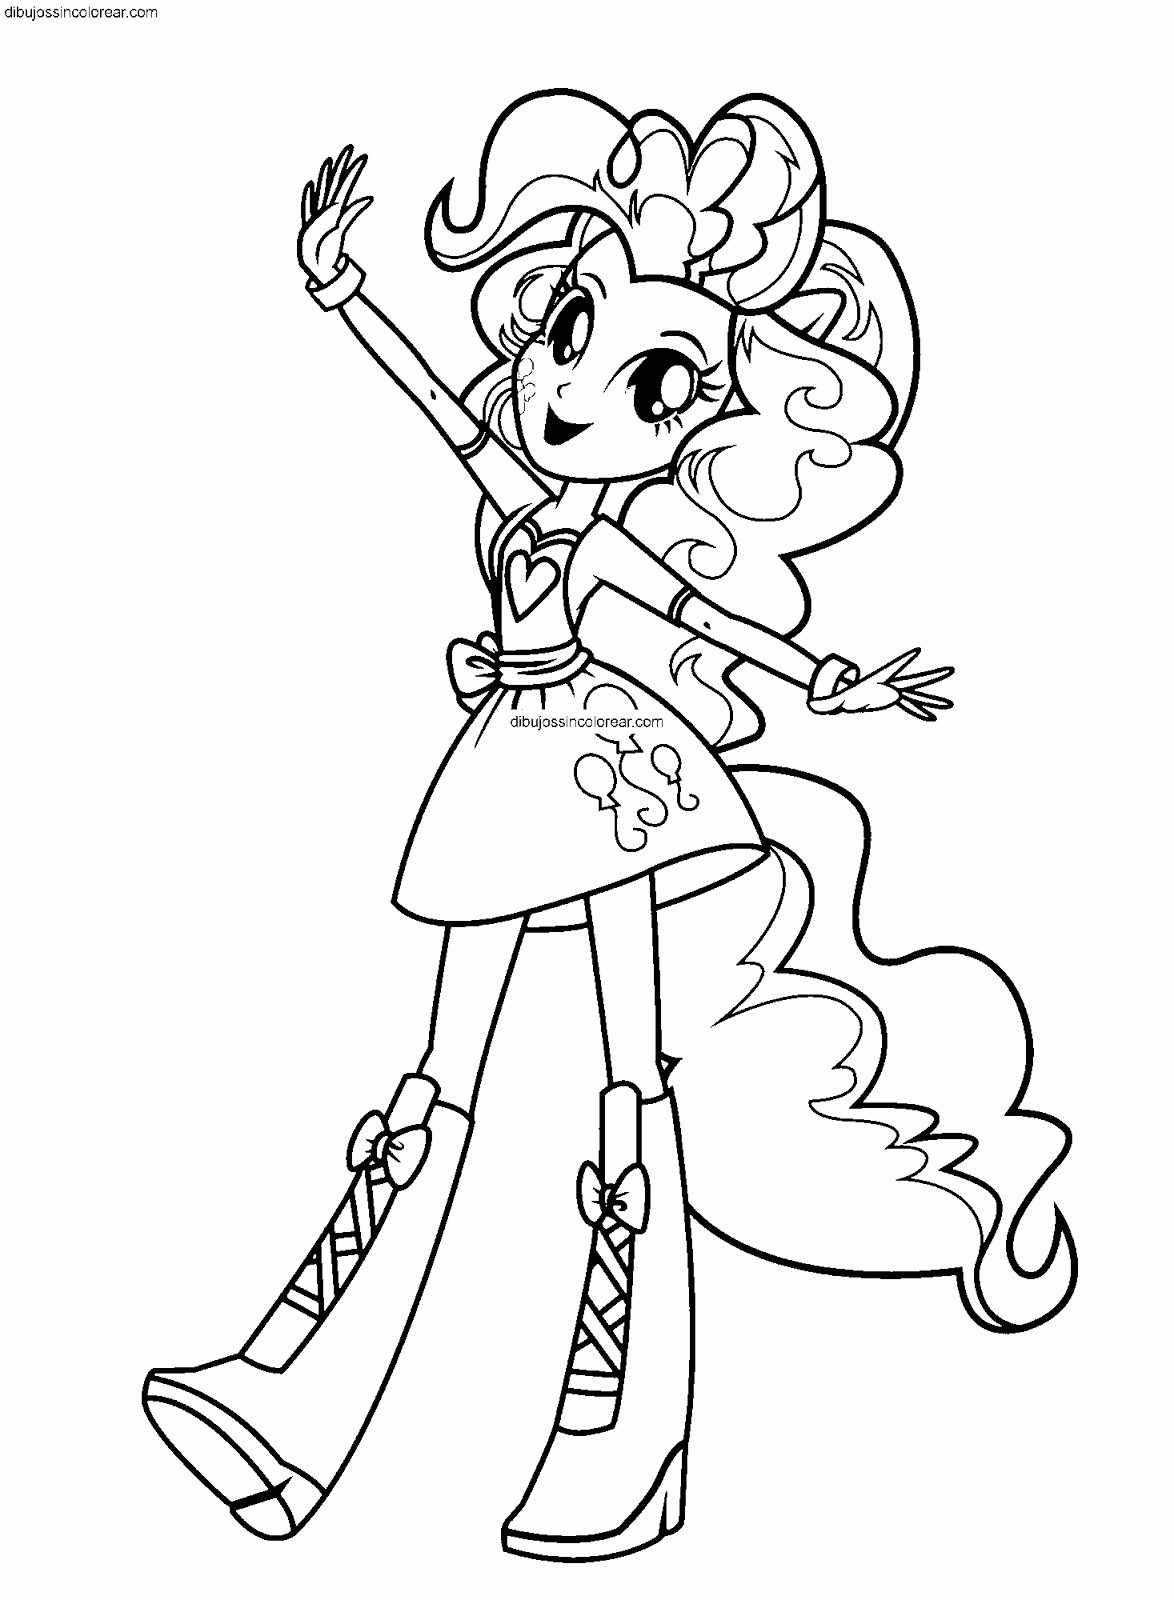 Equestria Girls Pinkie Pie Coloring Pages
 The Best Ideas for Equestria Girls Pinkie Pie Coloring